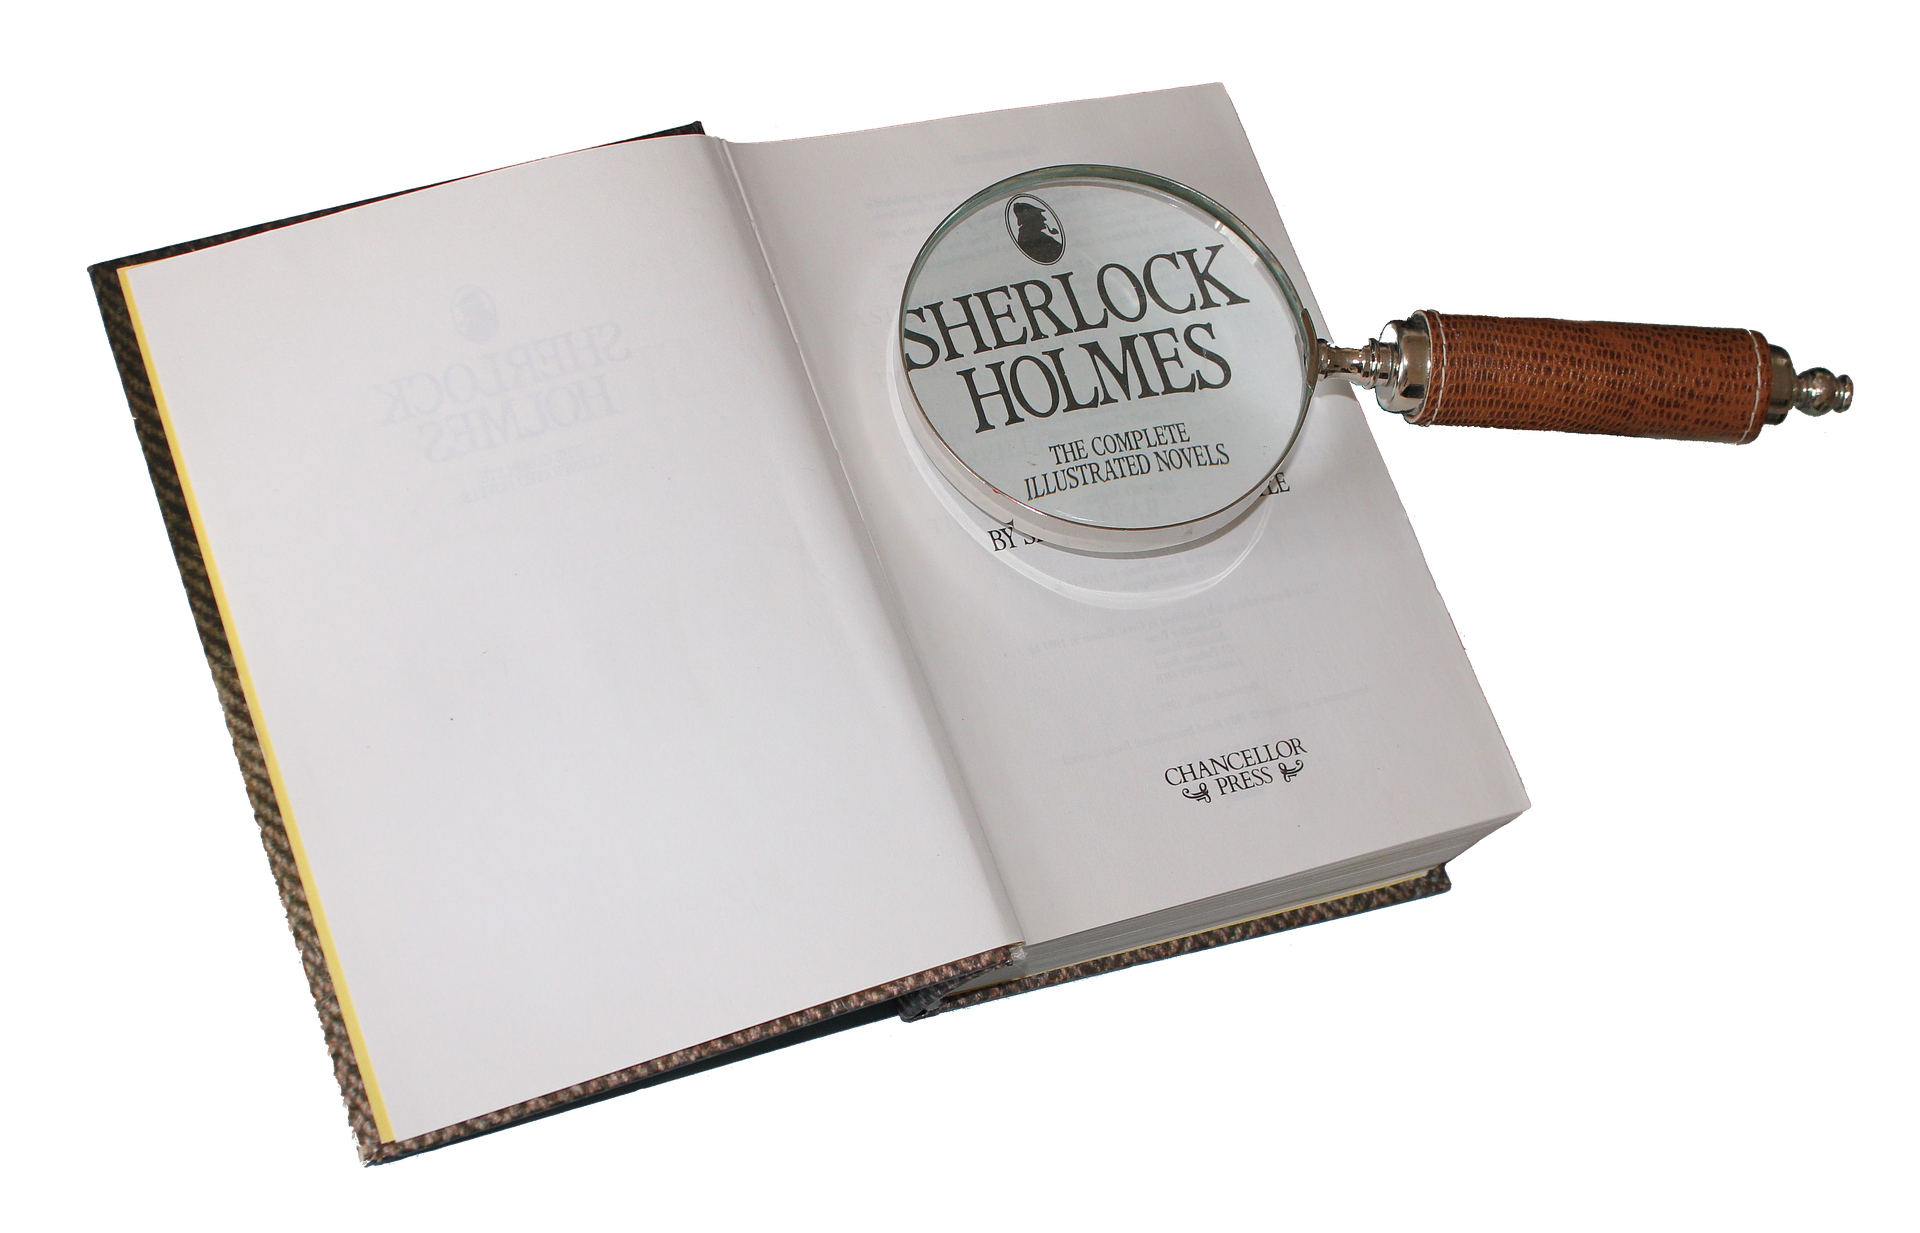 sherlock-holmes-series-how-many-words-did-you-read-word-count-tool